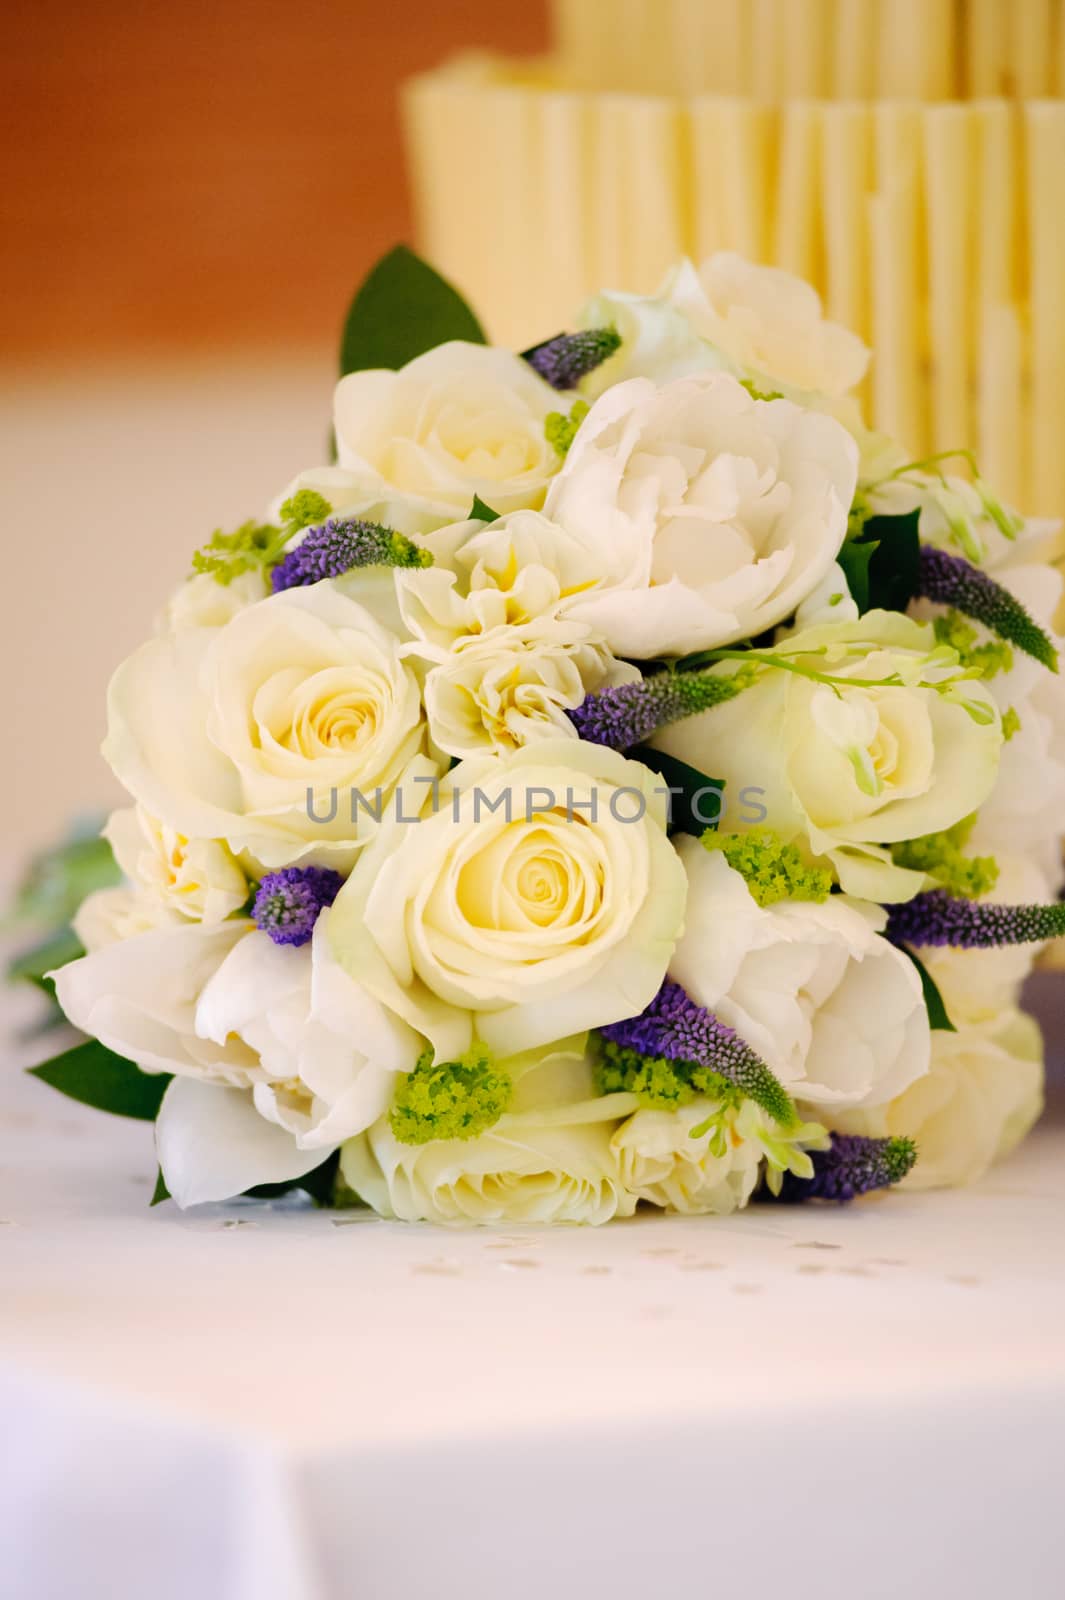 Yellow roses decorate cake table at wedding